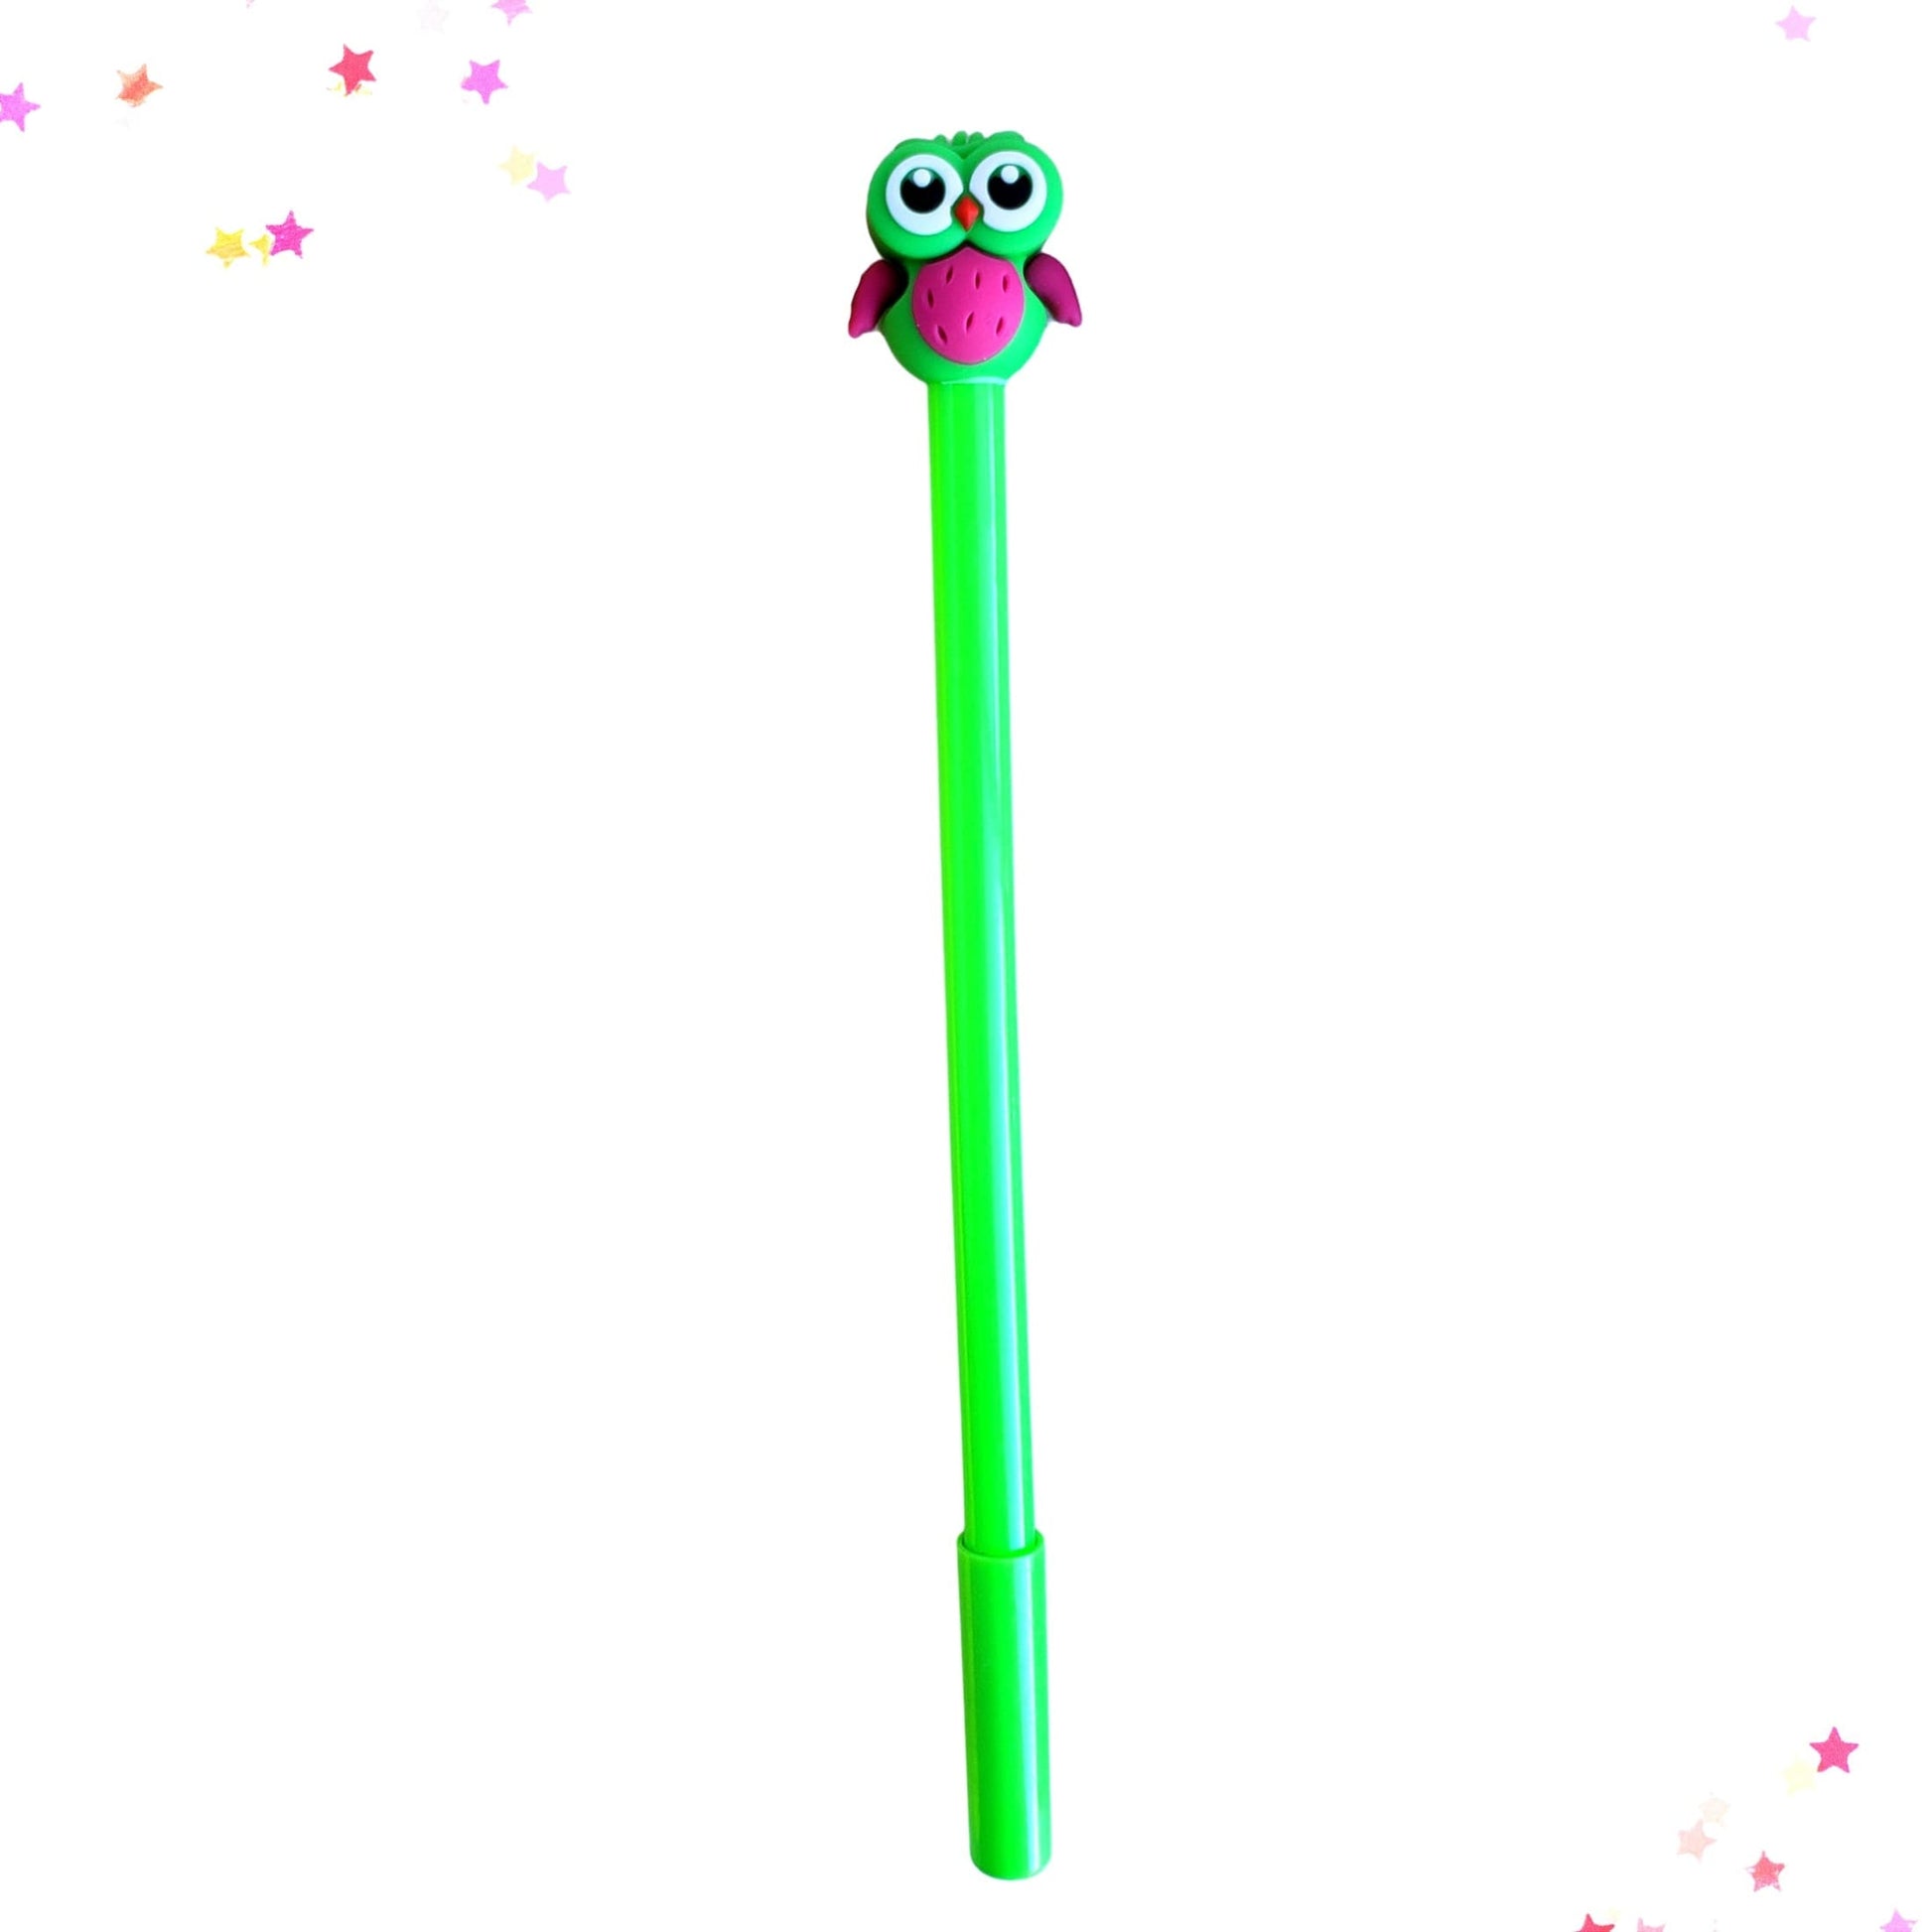 Whimsical Owl Gel Pen in Green from Confetti Kitty, Only 2.99